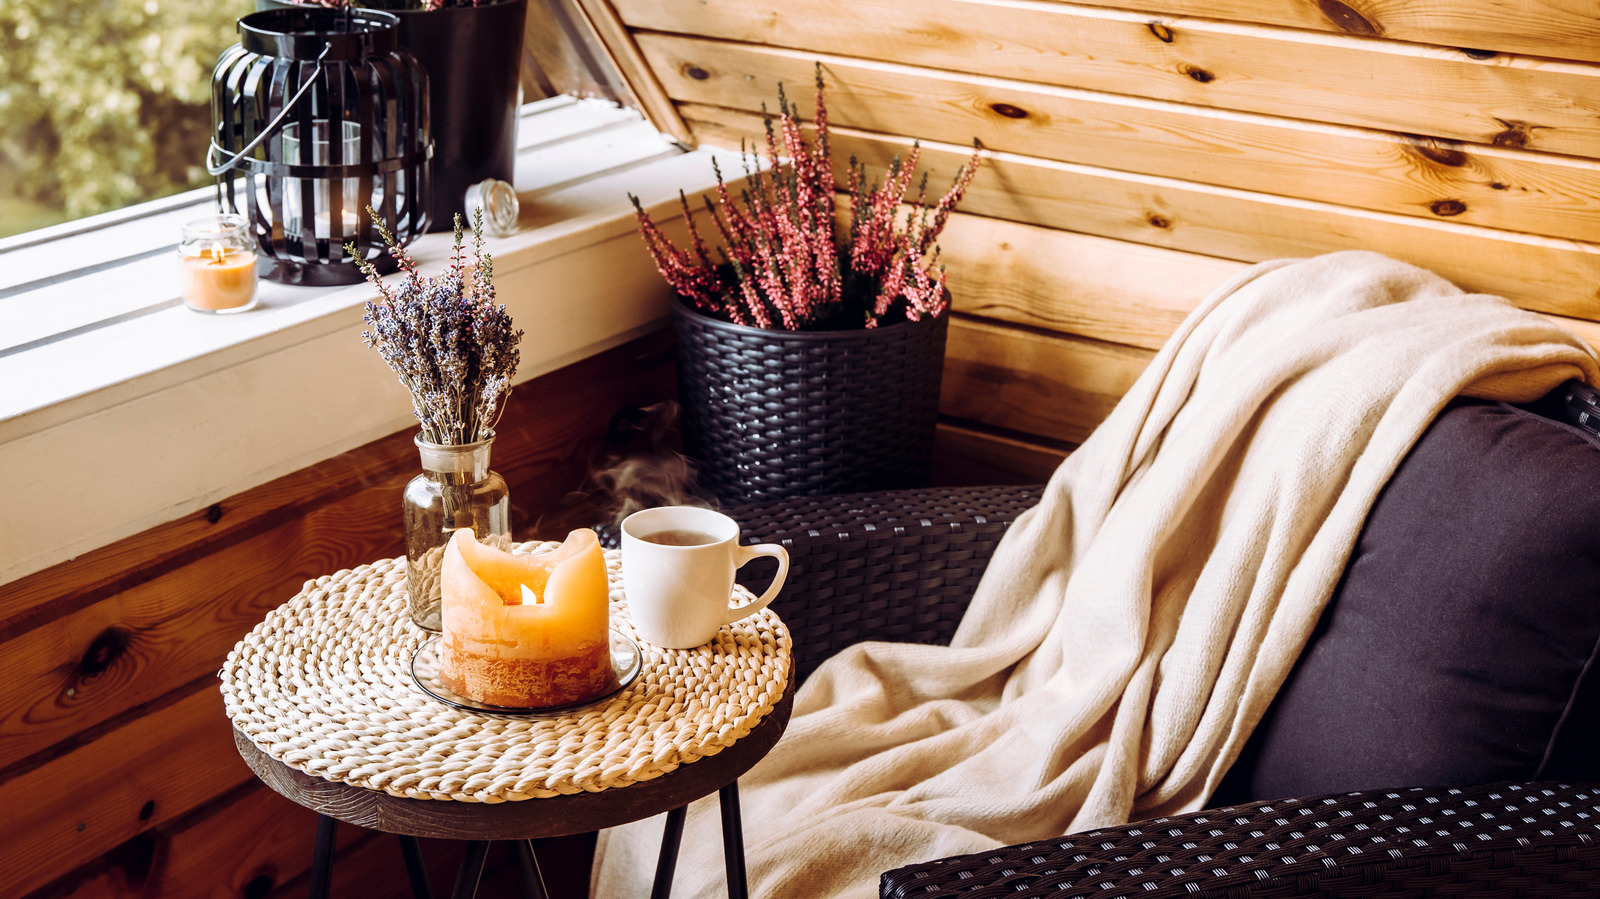 Creative Ways To Get Cozy in Your Cabin This Fall Season